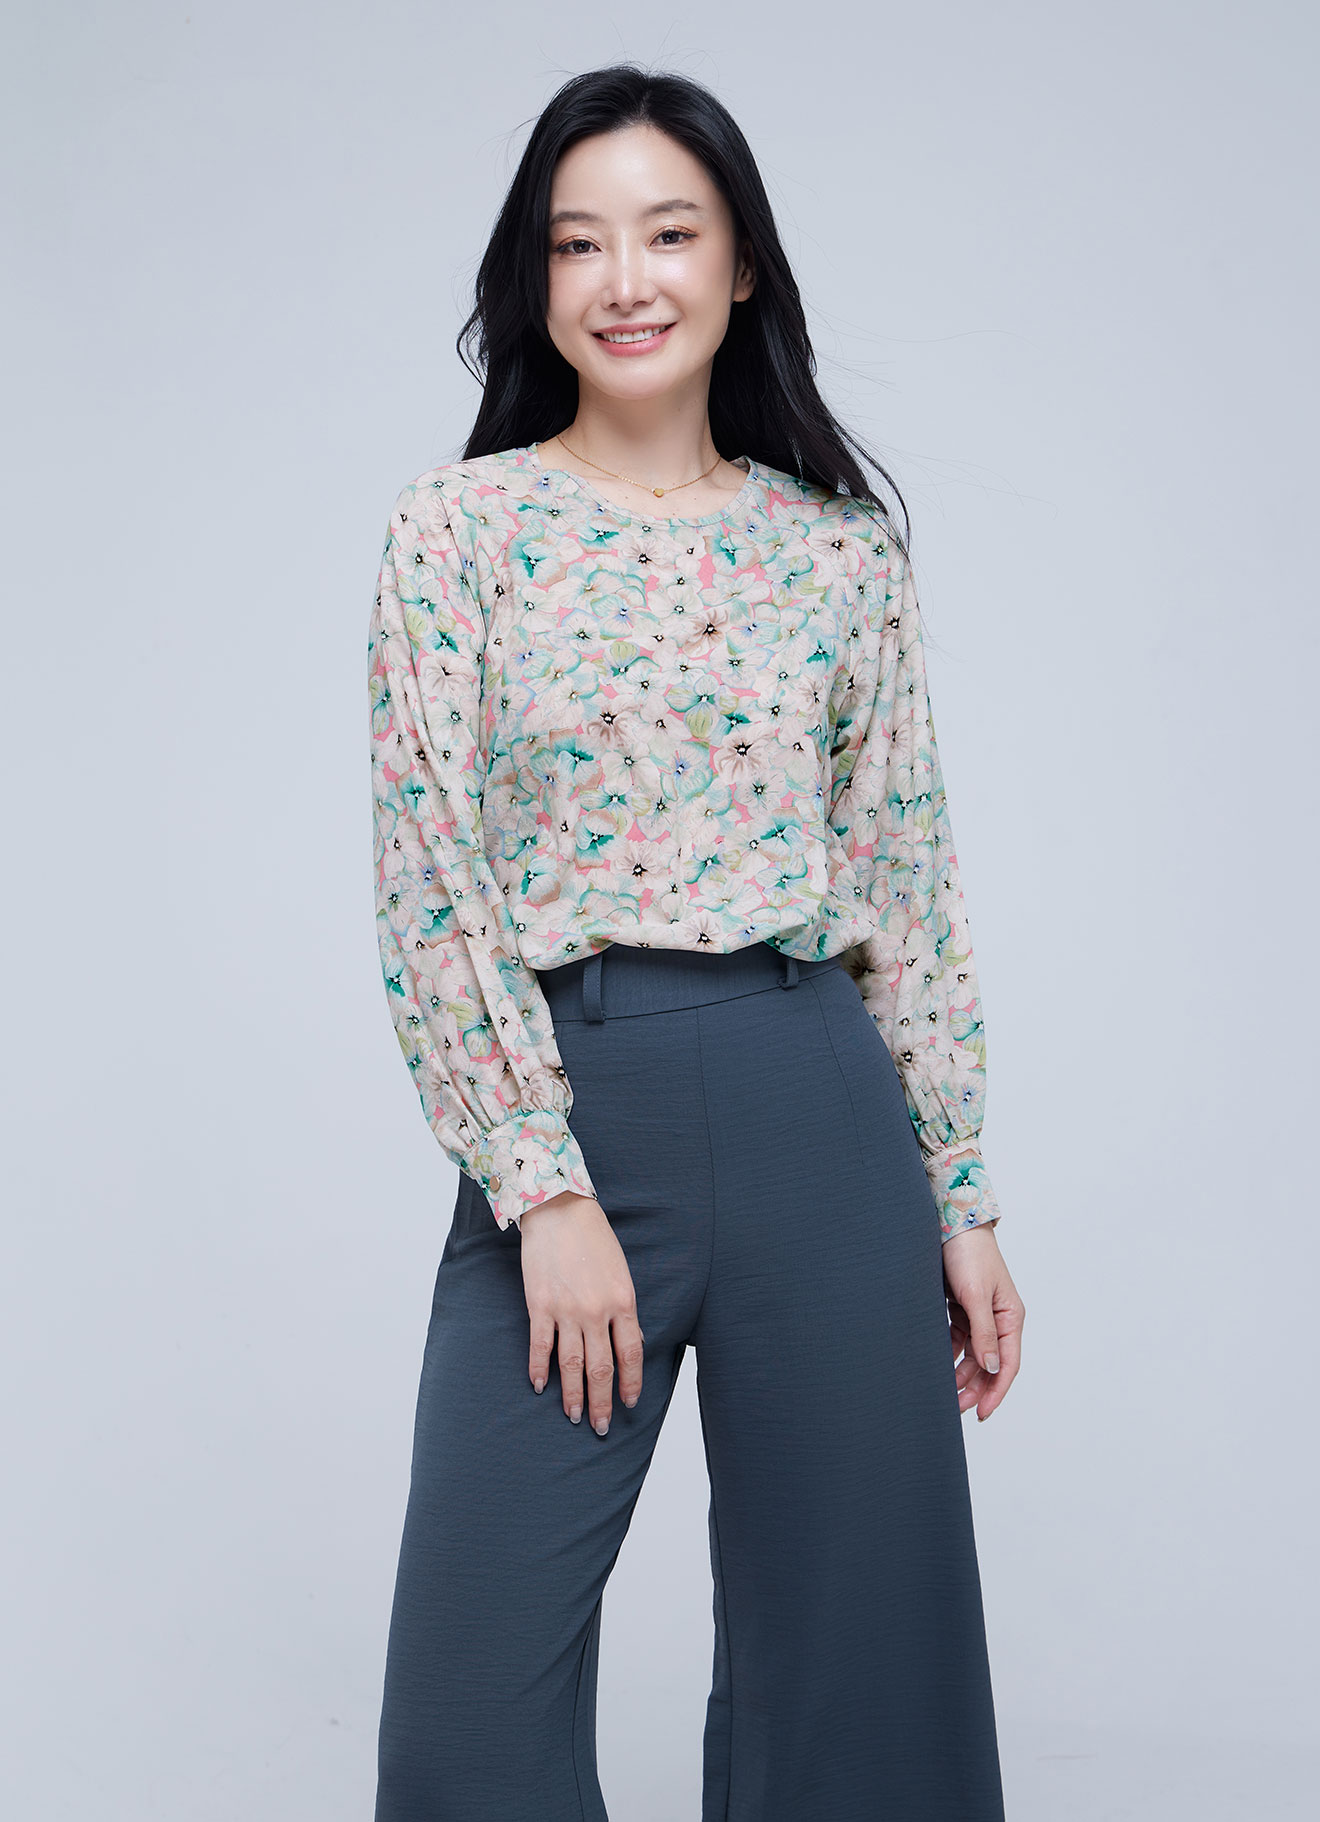 Candlelight-Peach by Long Sleeve Blouse